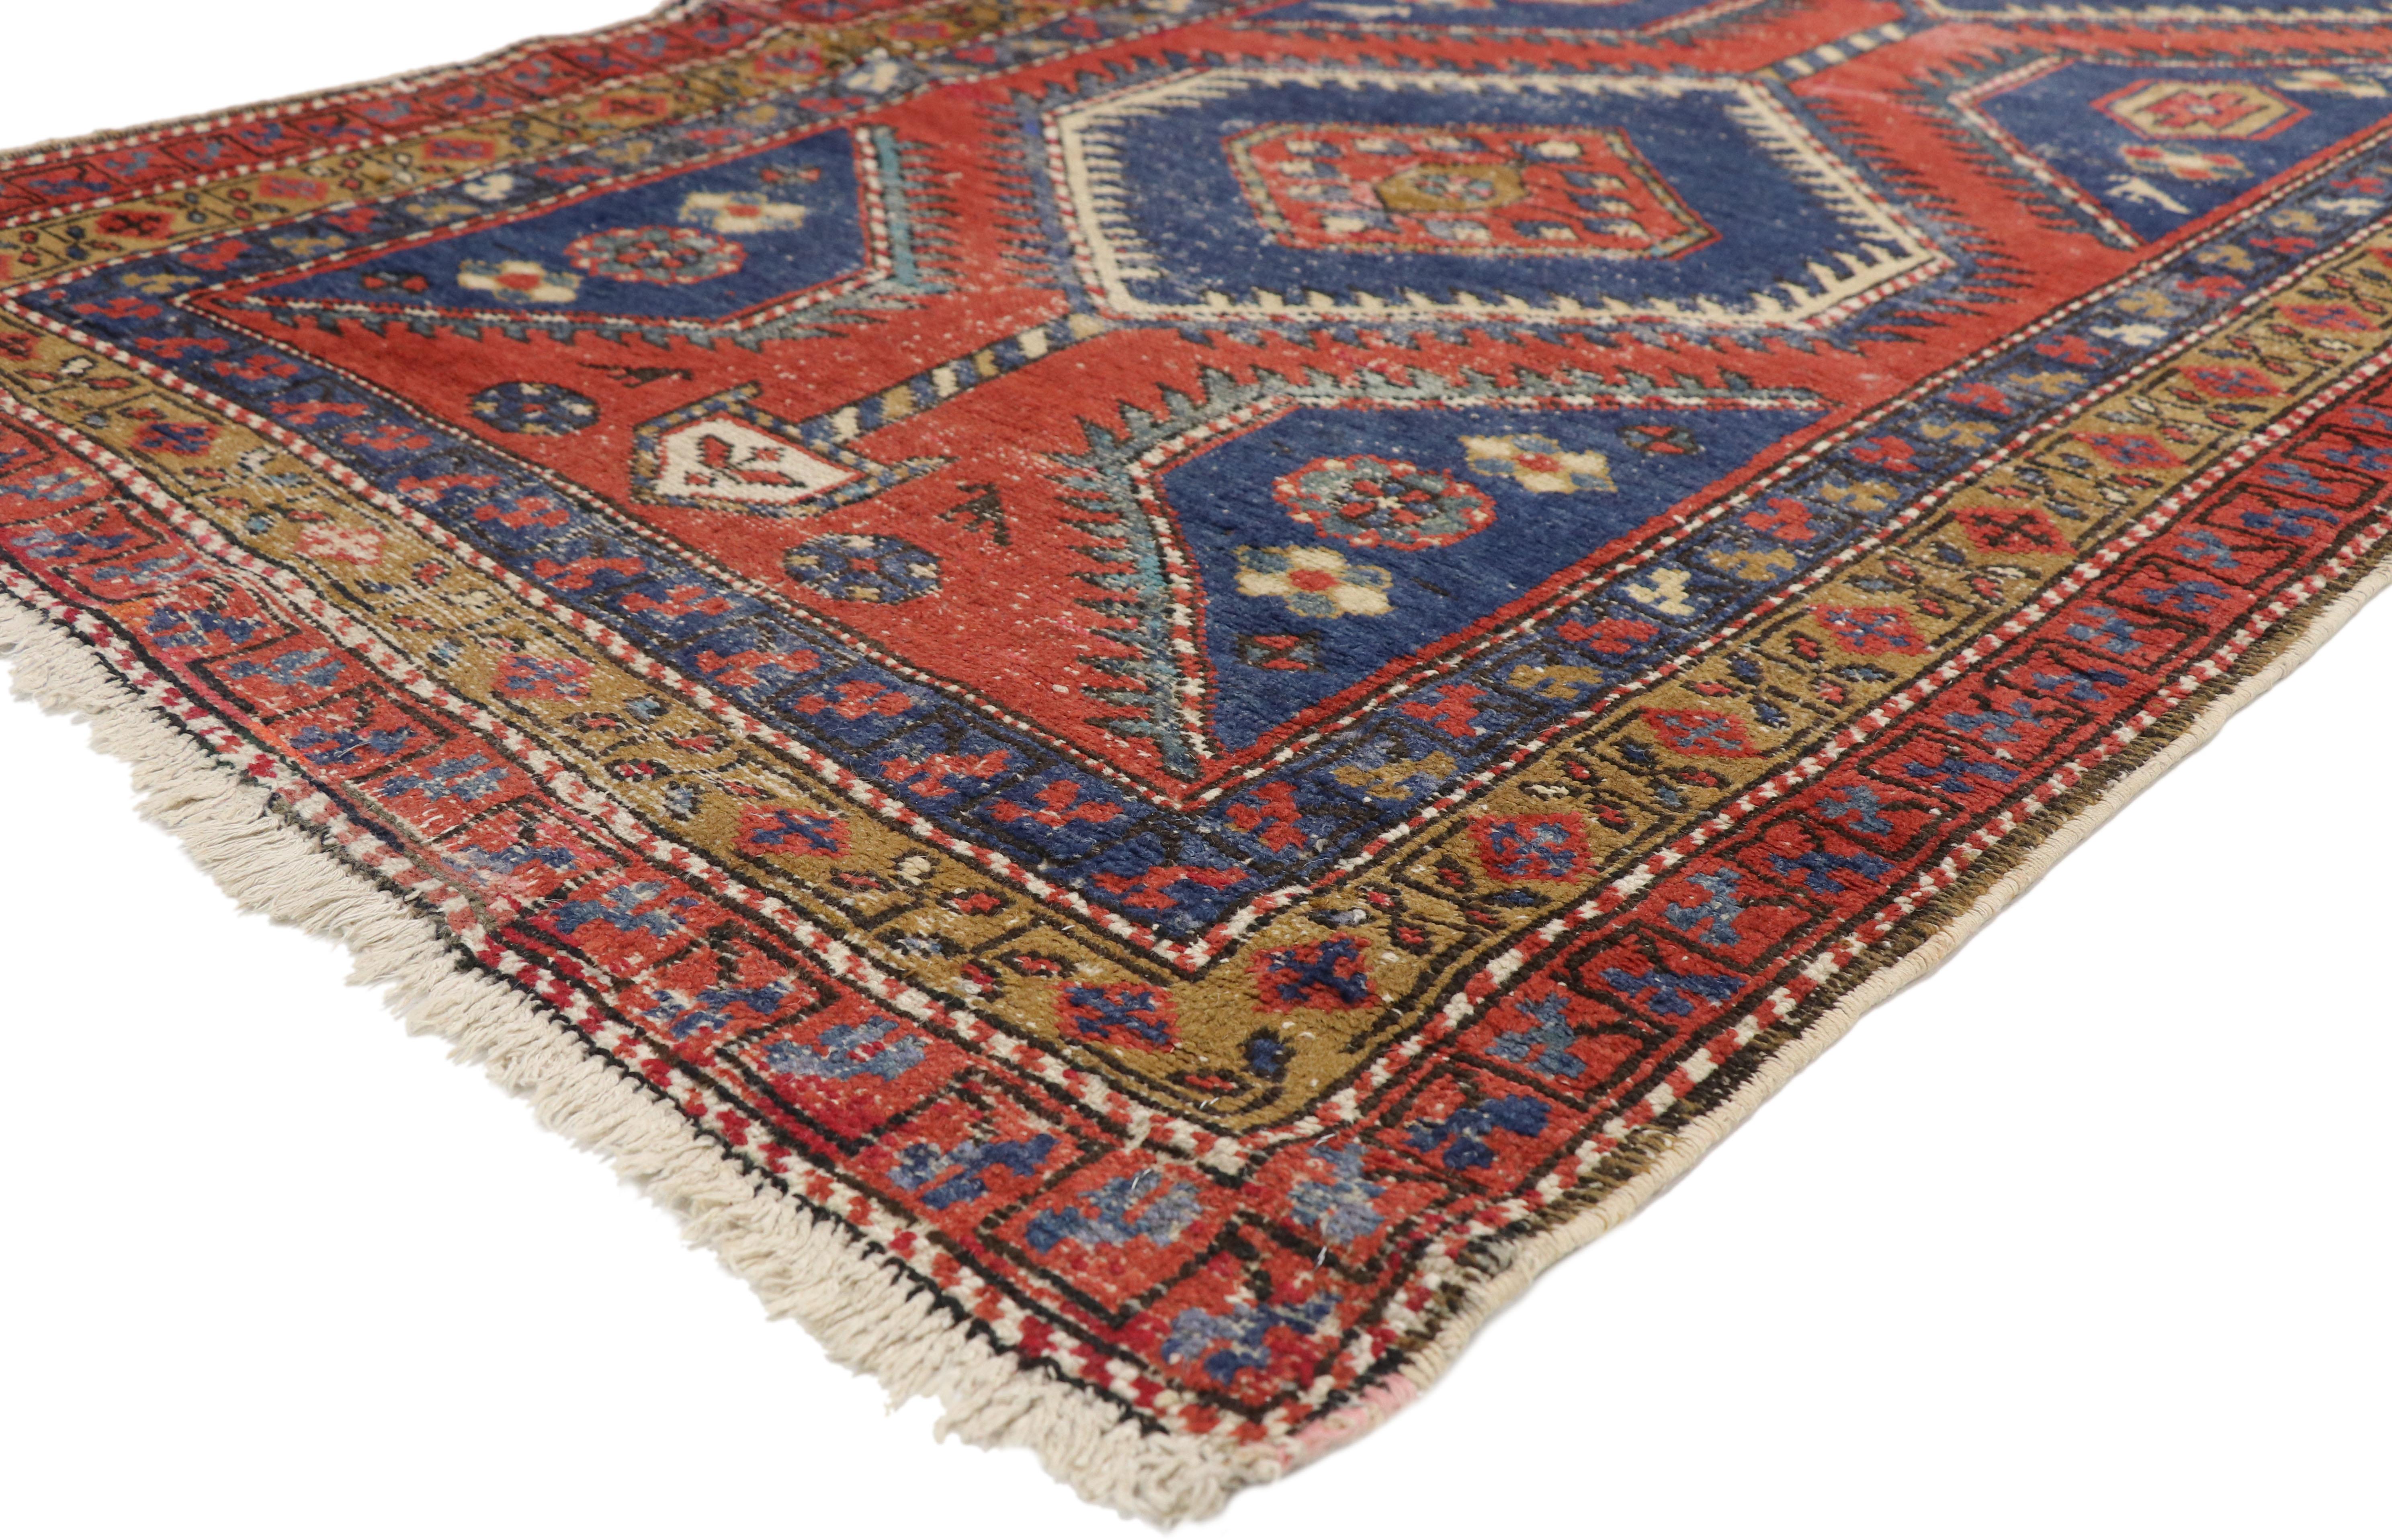 75644, distressed antique Persian Azerbaijan runner with industrial Tribal style. Displaying tribal charm and nomadic tribal style, this hand knotted wool distressed antique Persian Azerbaijan runner is an amalgam of Caucasian tribal influence. The